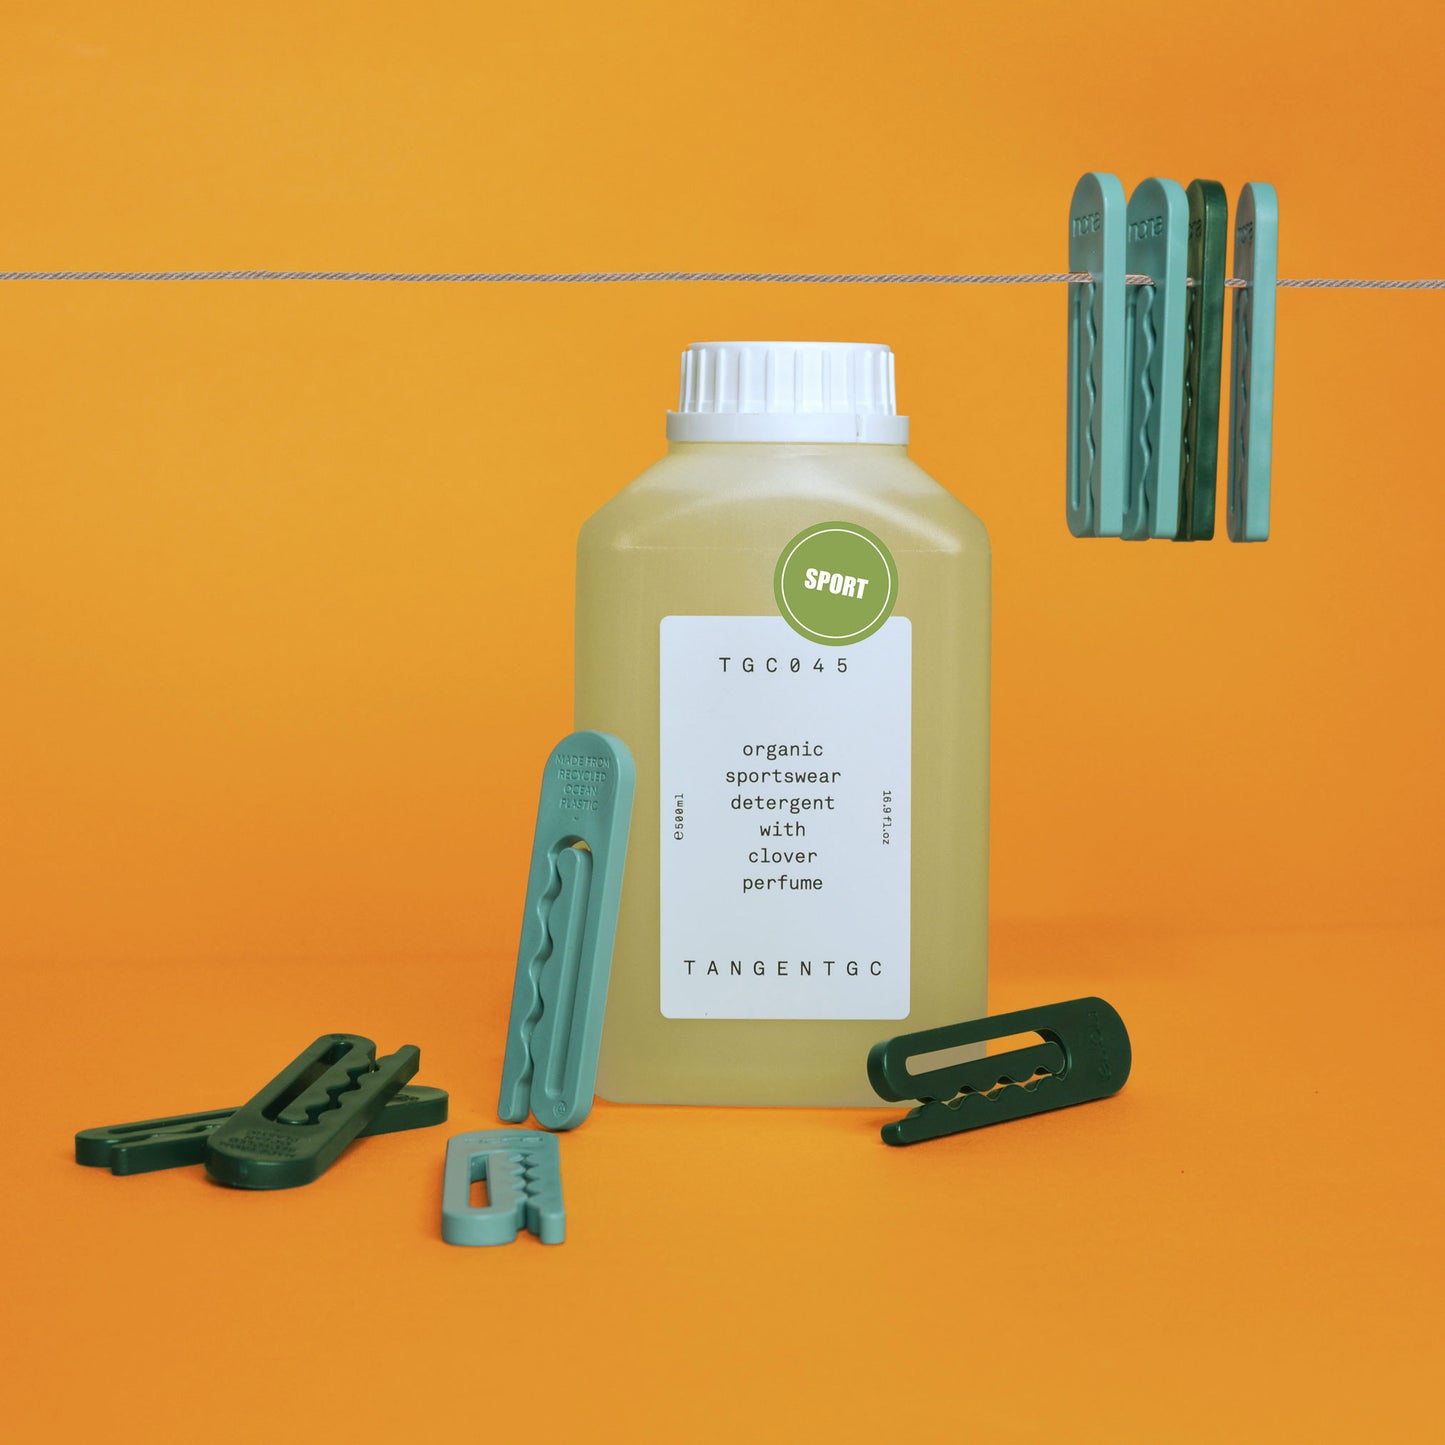 A bottle of sportswear specialty detergent photographed with recycled ocean plastic clothespins, some of which hang from a clothesline overhead